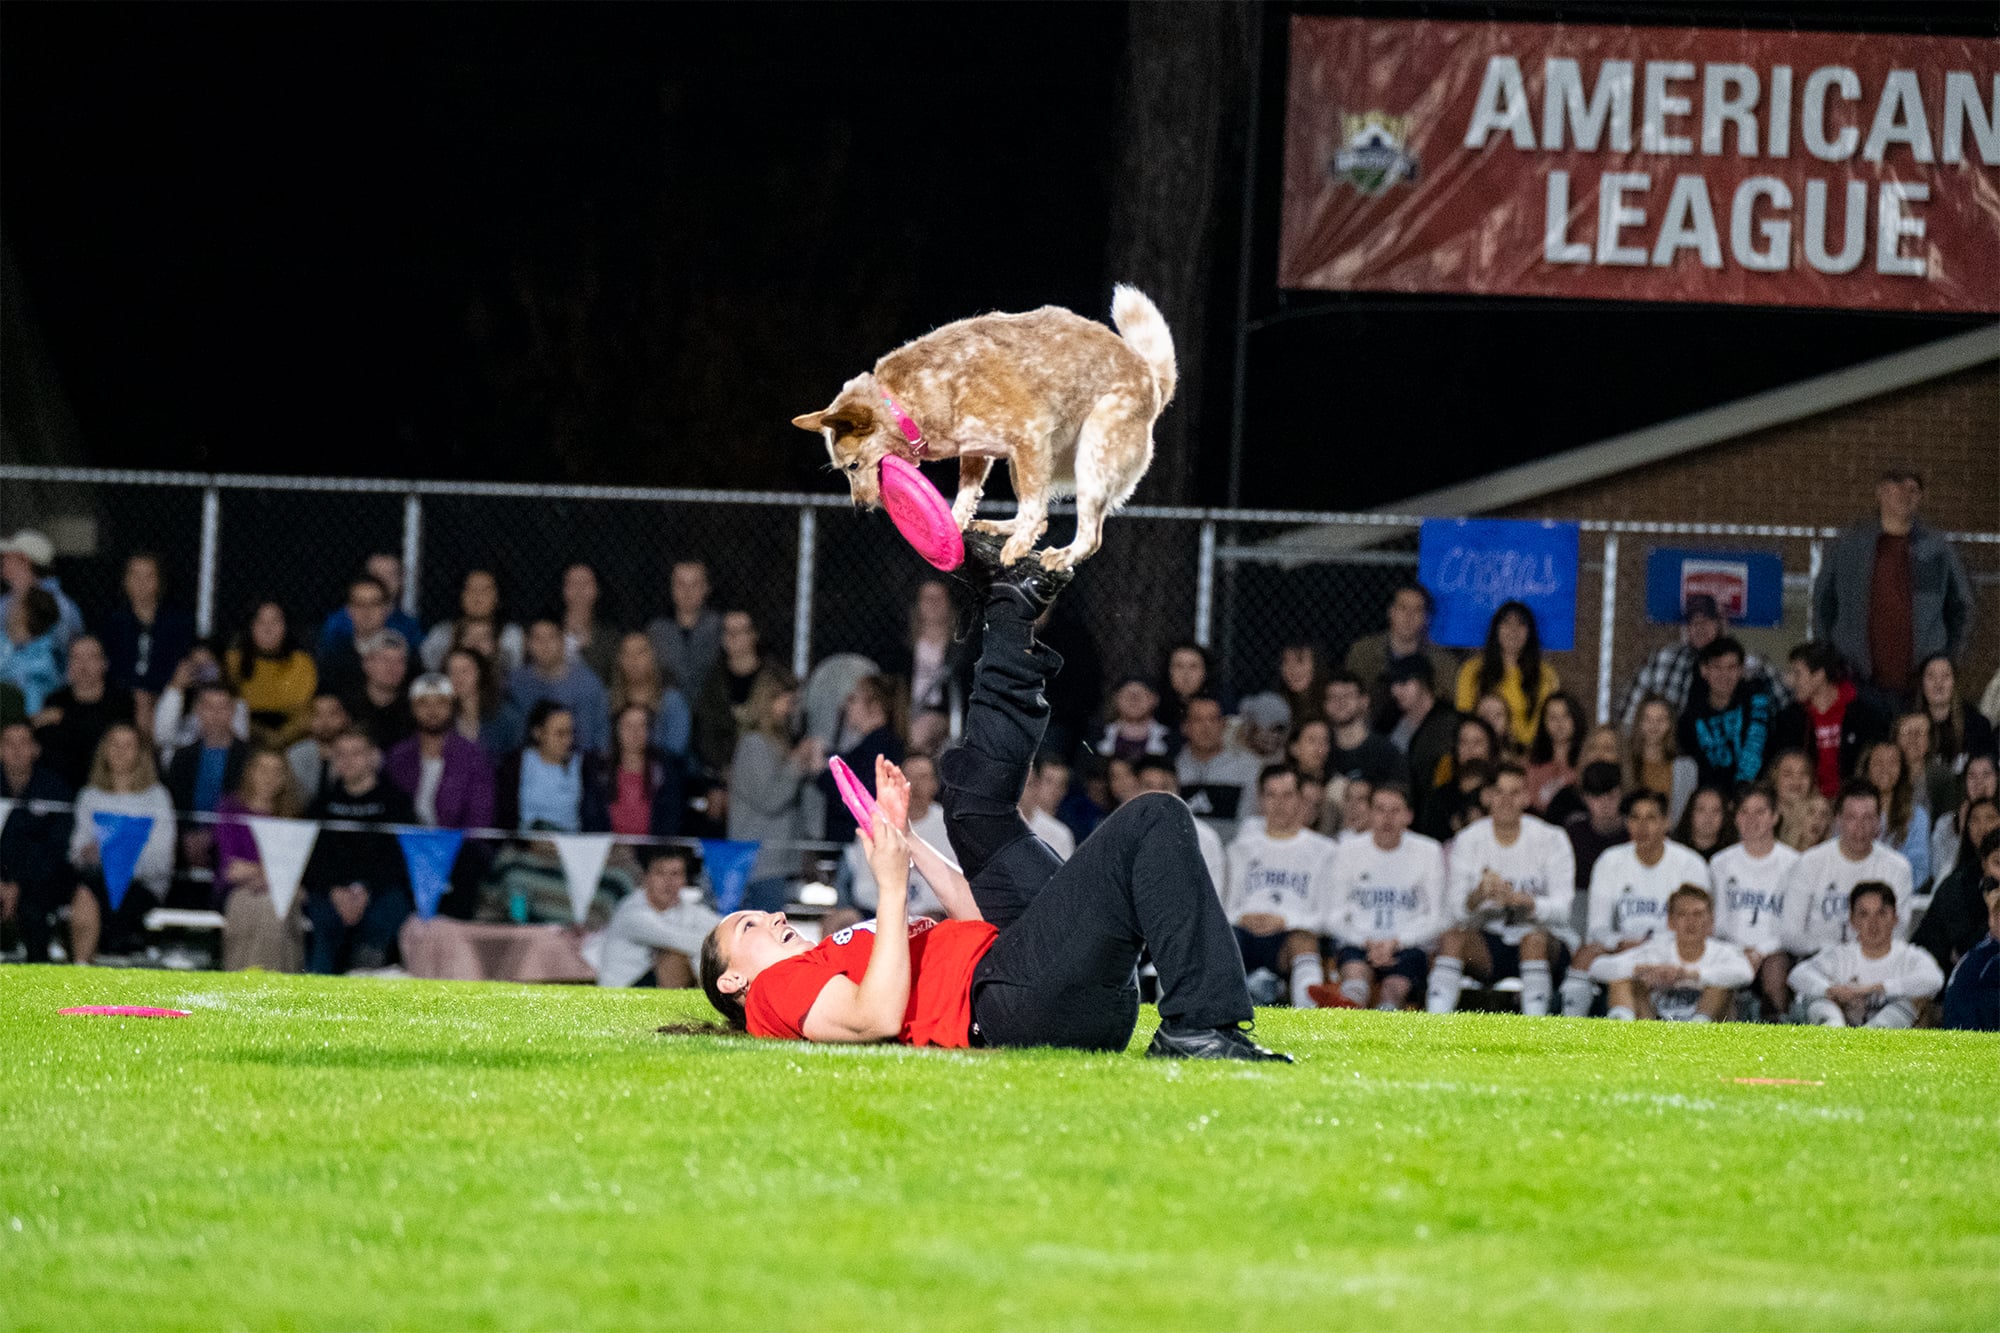 A tan dog from Stunt Dog Productions balances on the foot of her trainer.